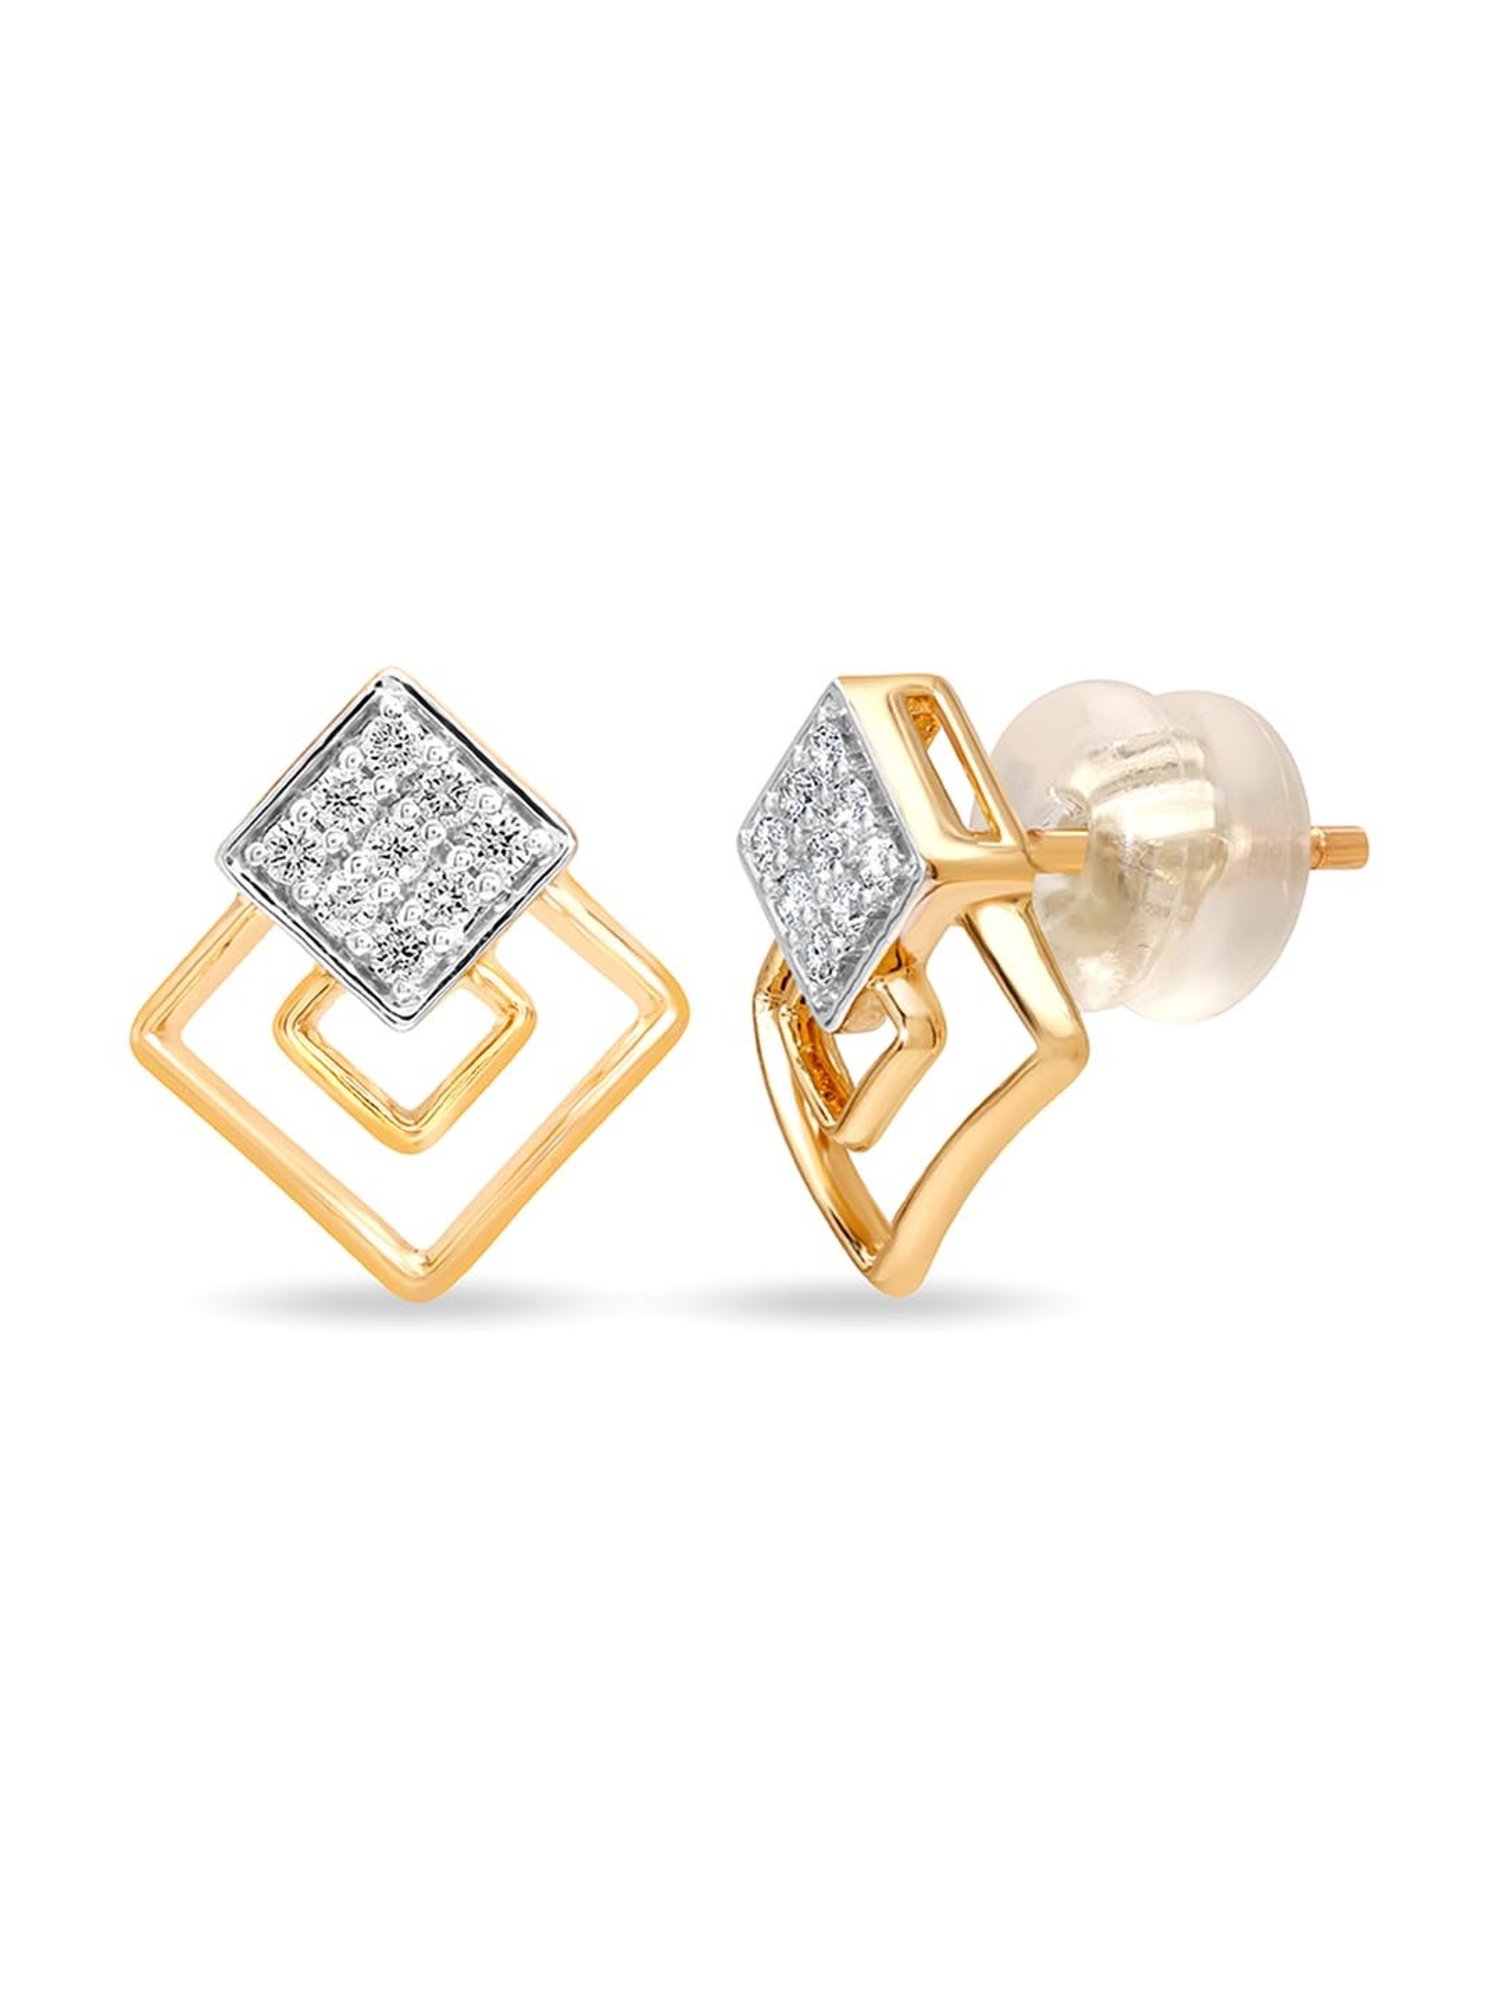 Sparkling Avenues | Tanishq Online Store